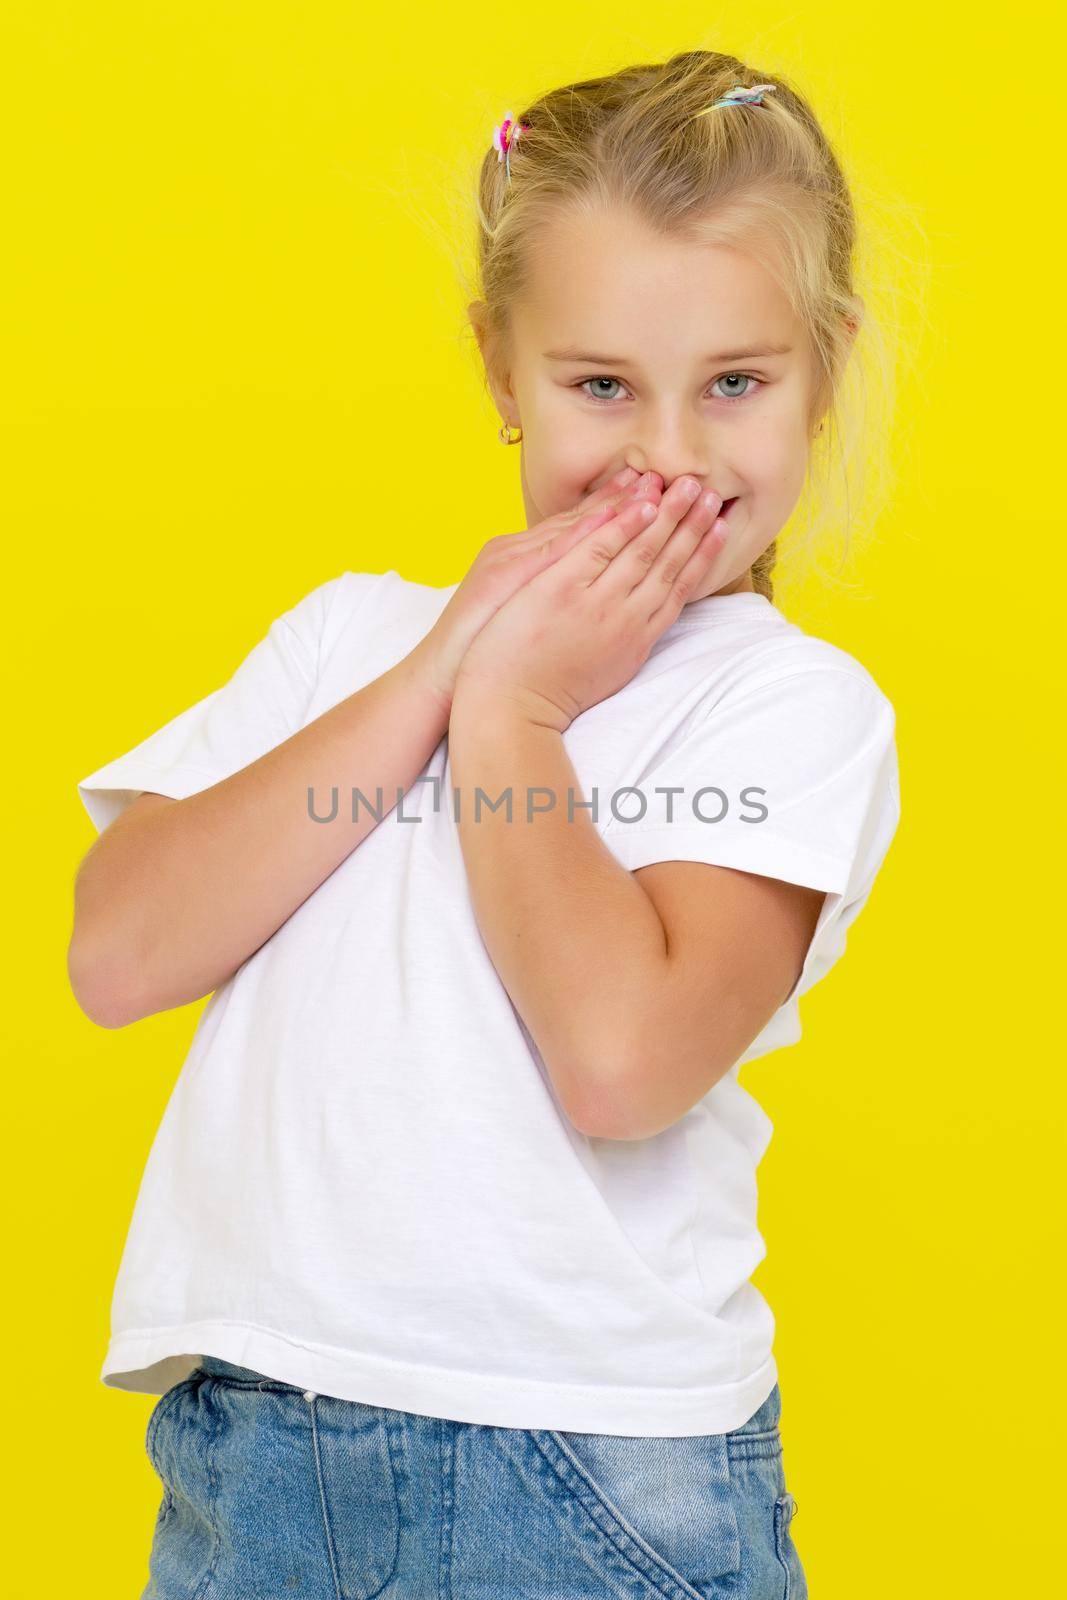 Emotional little girl in a clean white T-shirt. The concept can be used to advertise goods and services, whose logo can be printed on the surface of the shirt.On a yellow background.